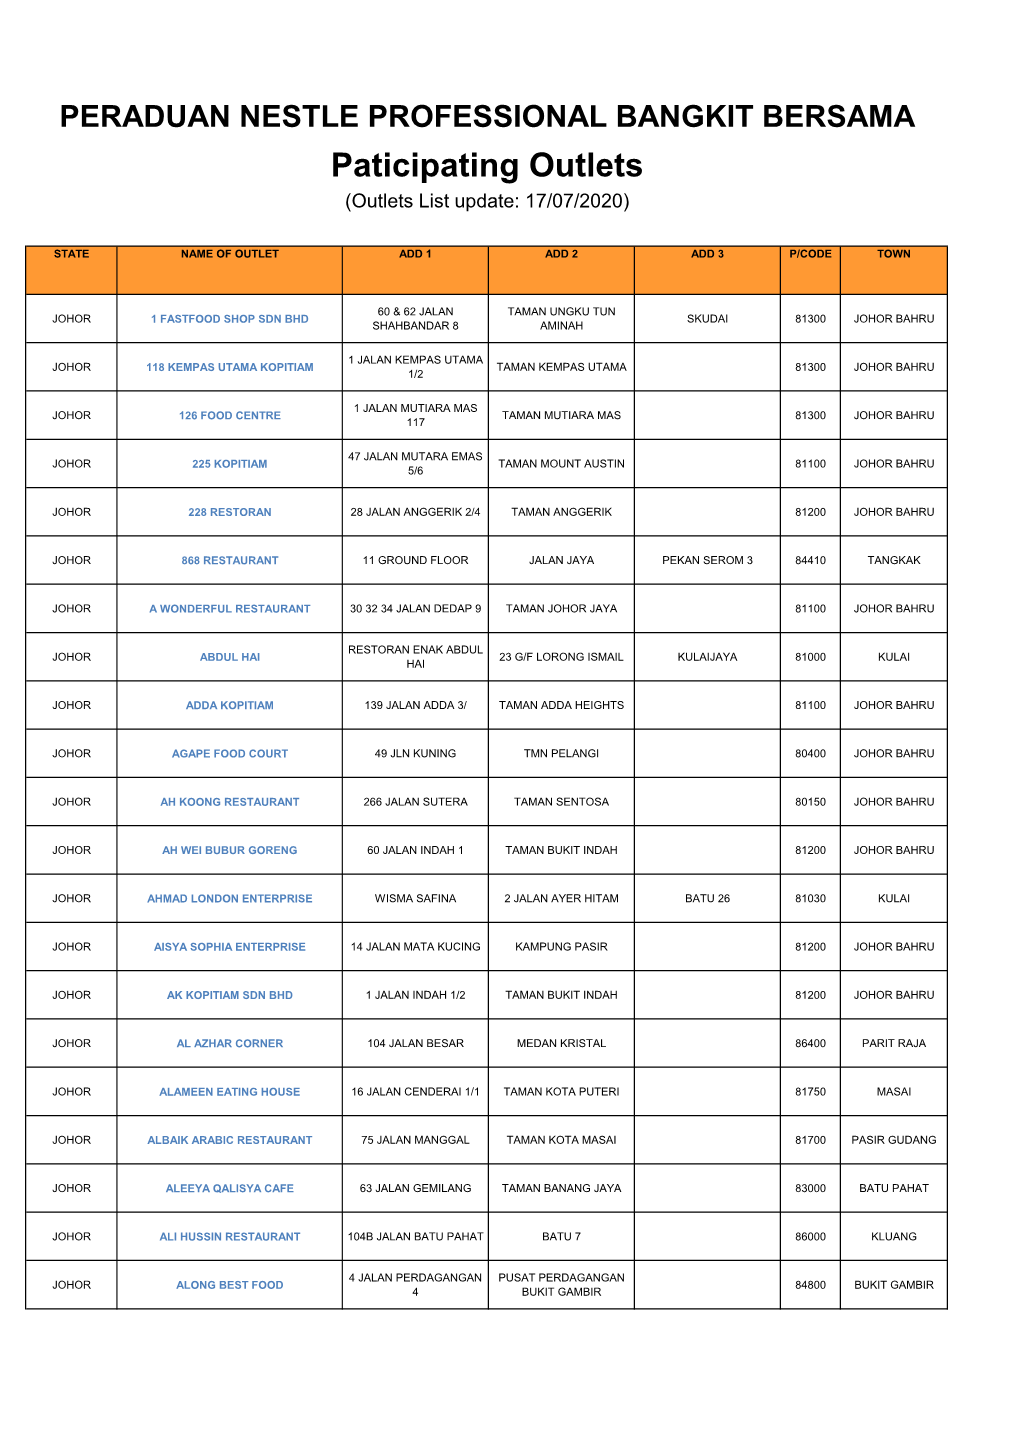 Paticipating Outlets (Outlets List Update: 17/07/2020)